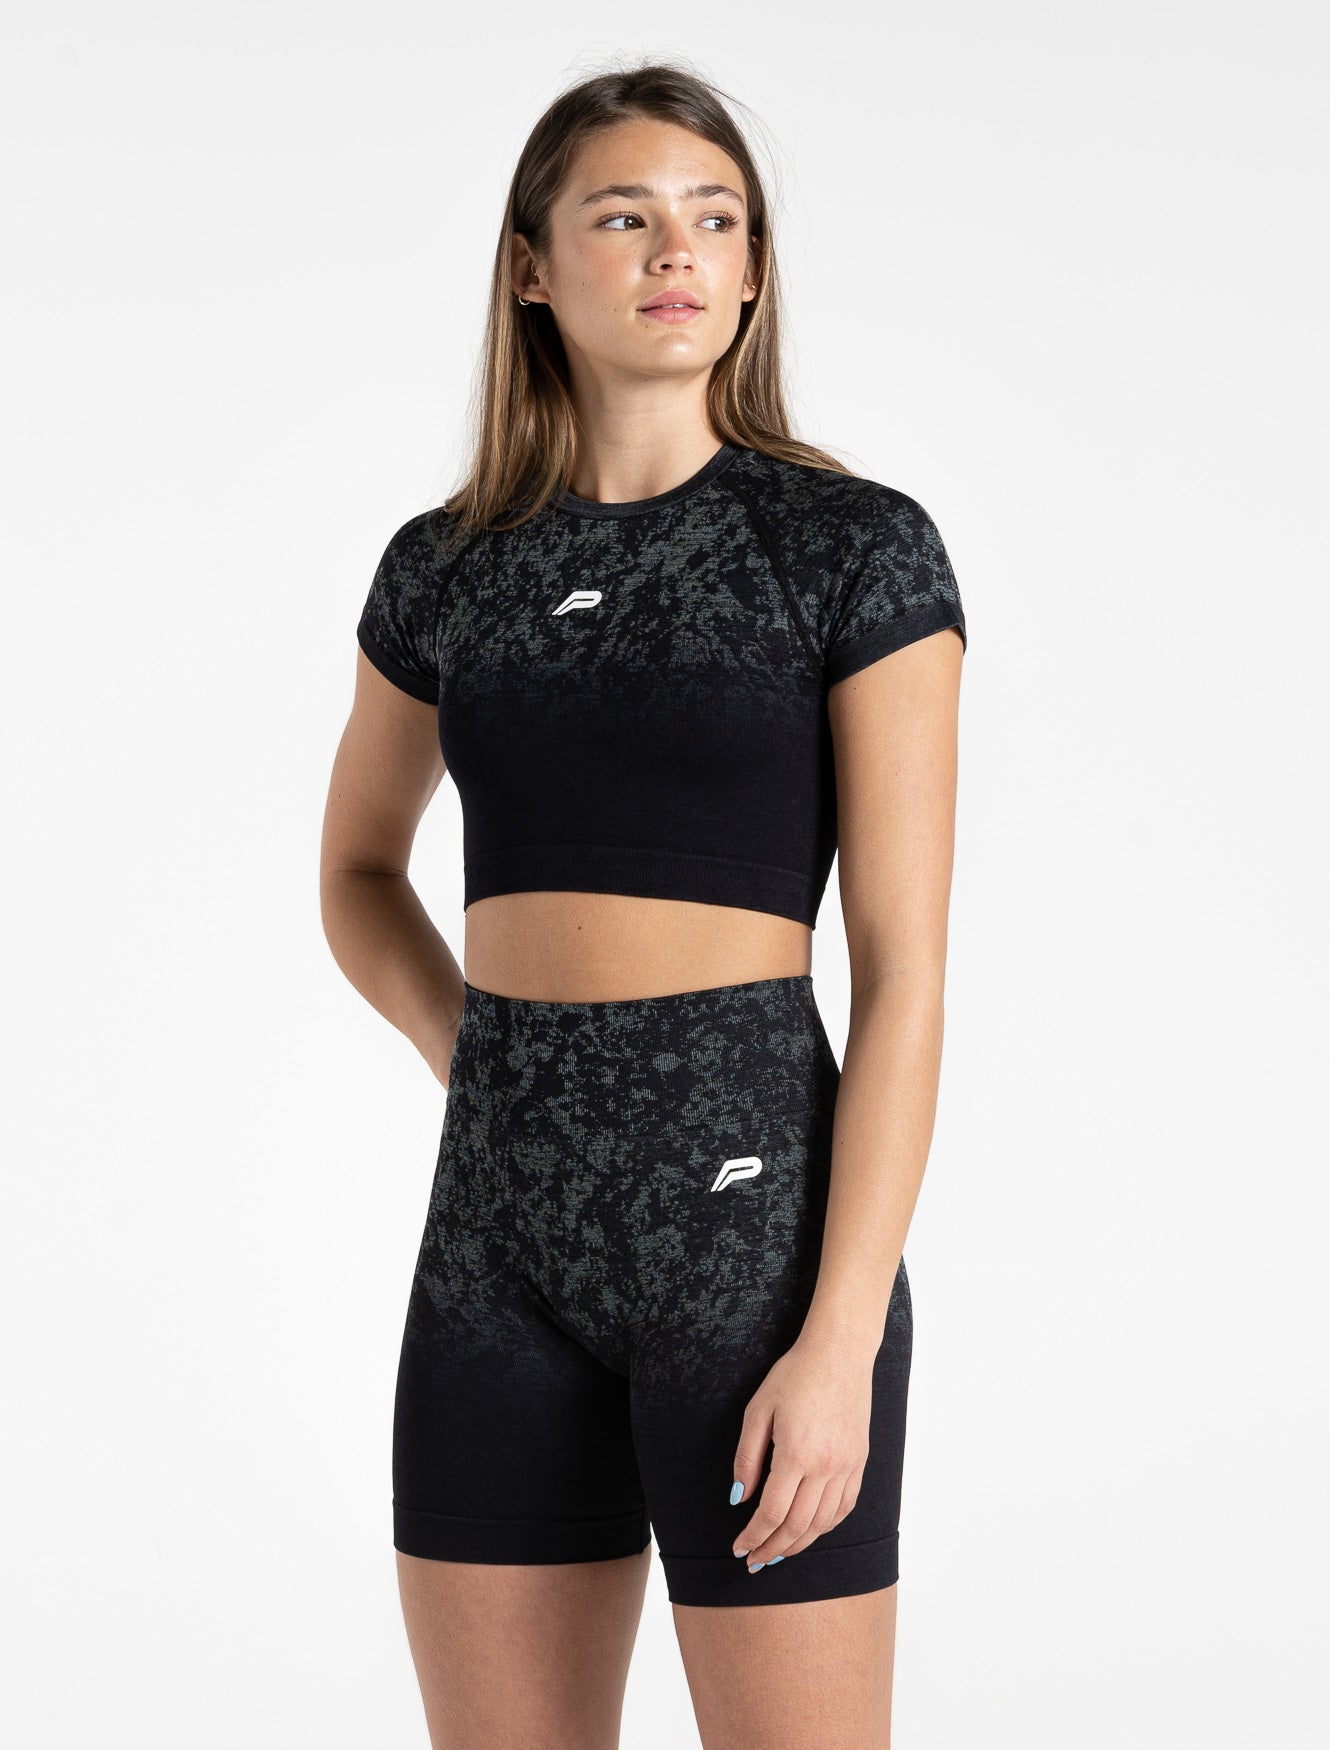 Cosmic Seamless Crop Top / Black Ombre Pursue Fitness 1